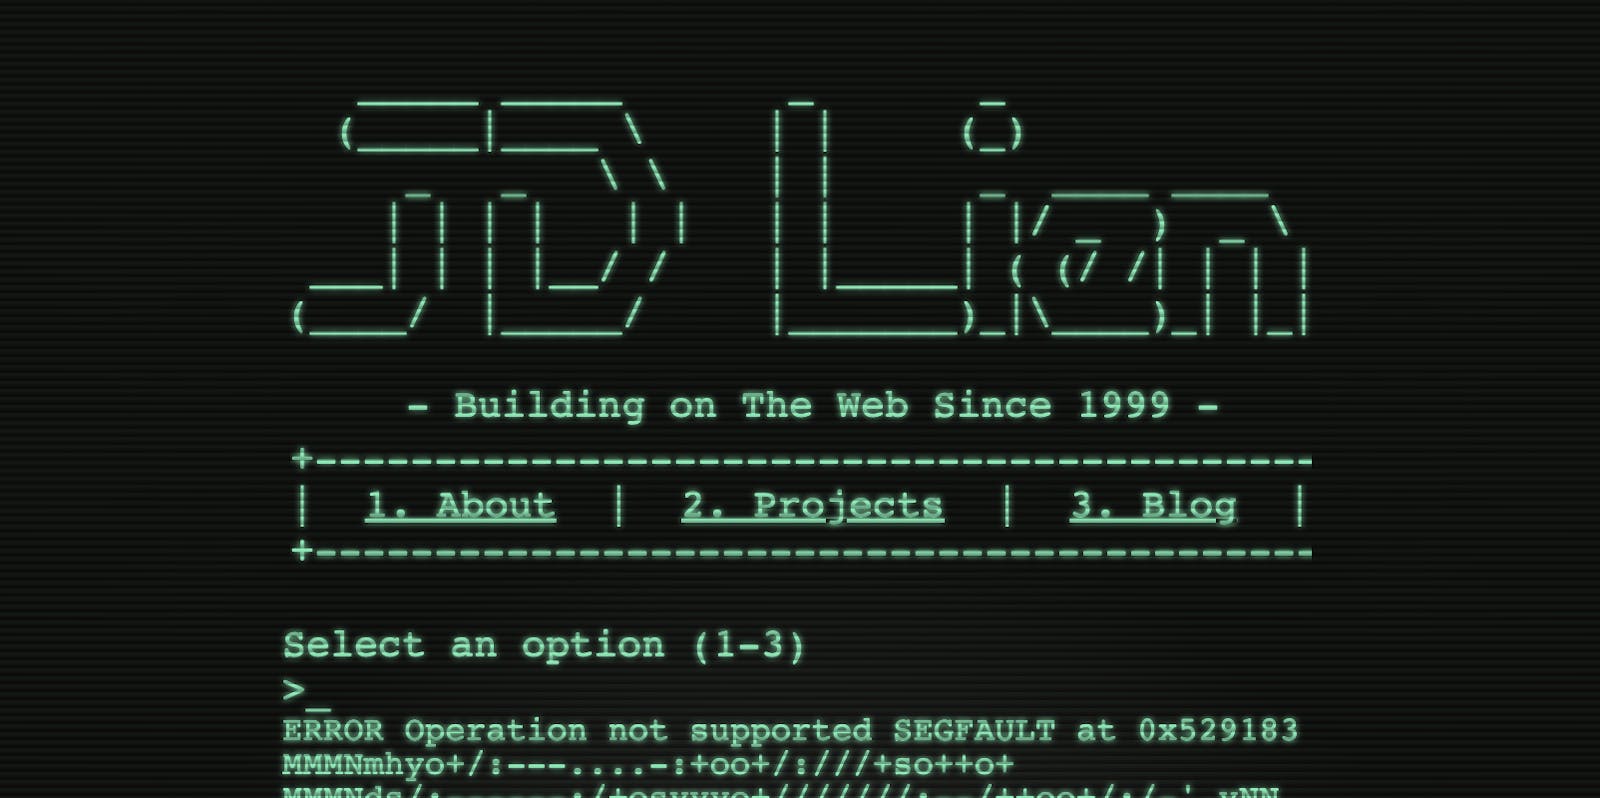 How I Made My '80s Retro-Style Homepage - Part 1